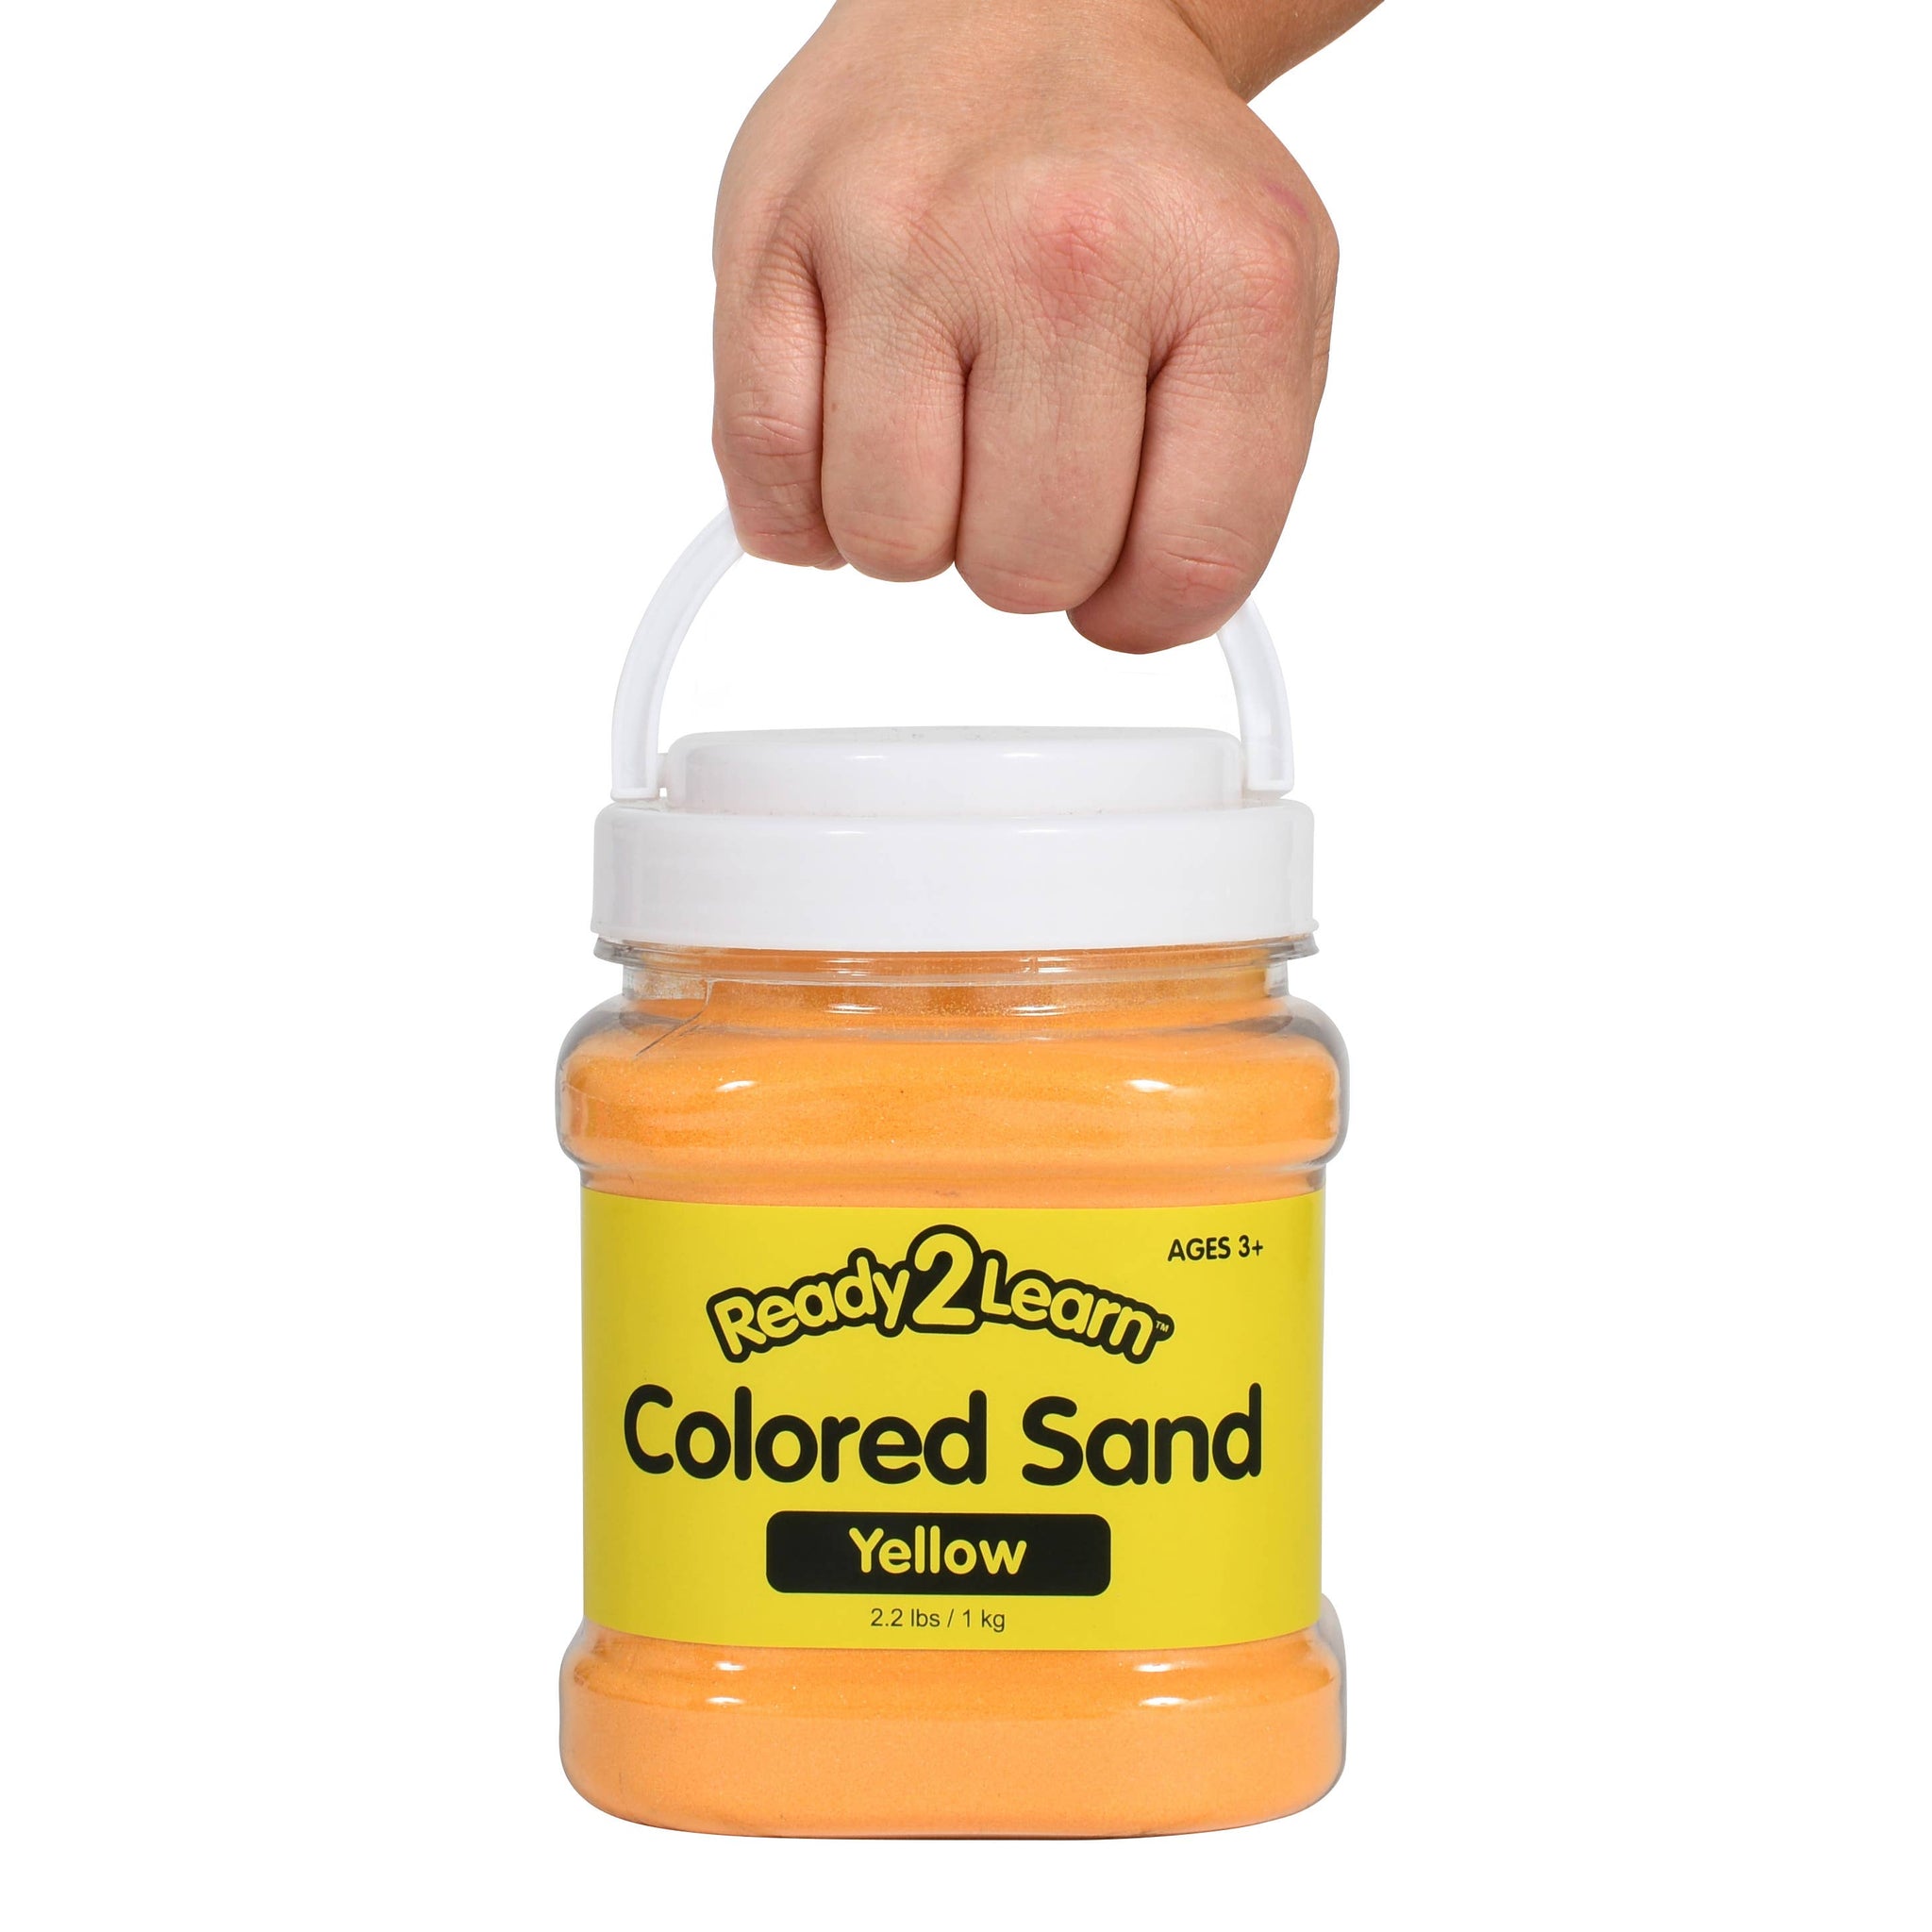 Colored Sand - Yellow